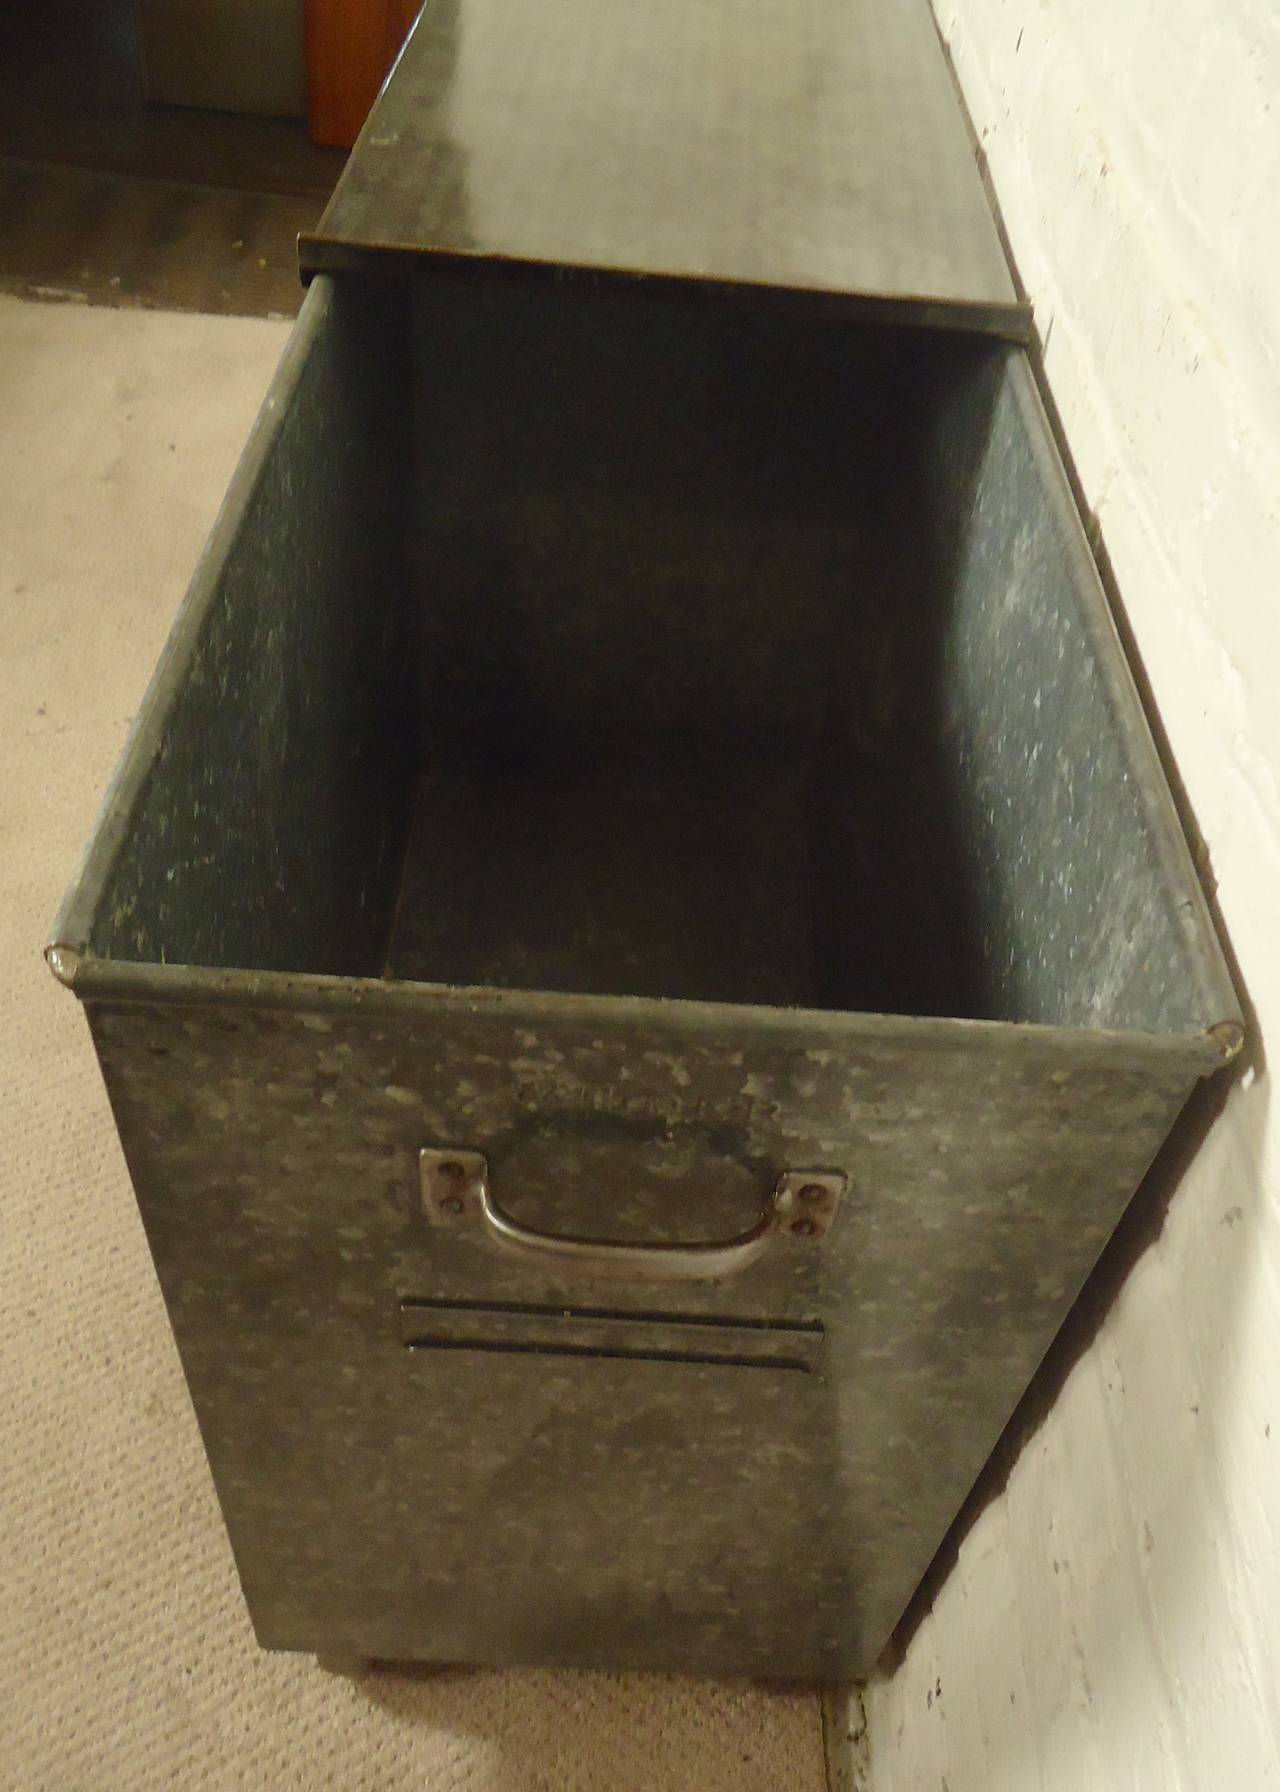 Restored rolling trash cart with sliding top. Galvanized metal throughout.

(Please confirm item location - NY or NJ - with dealer)